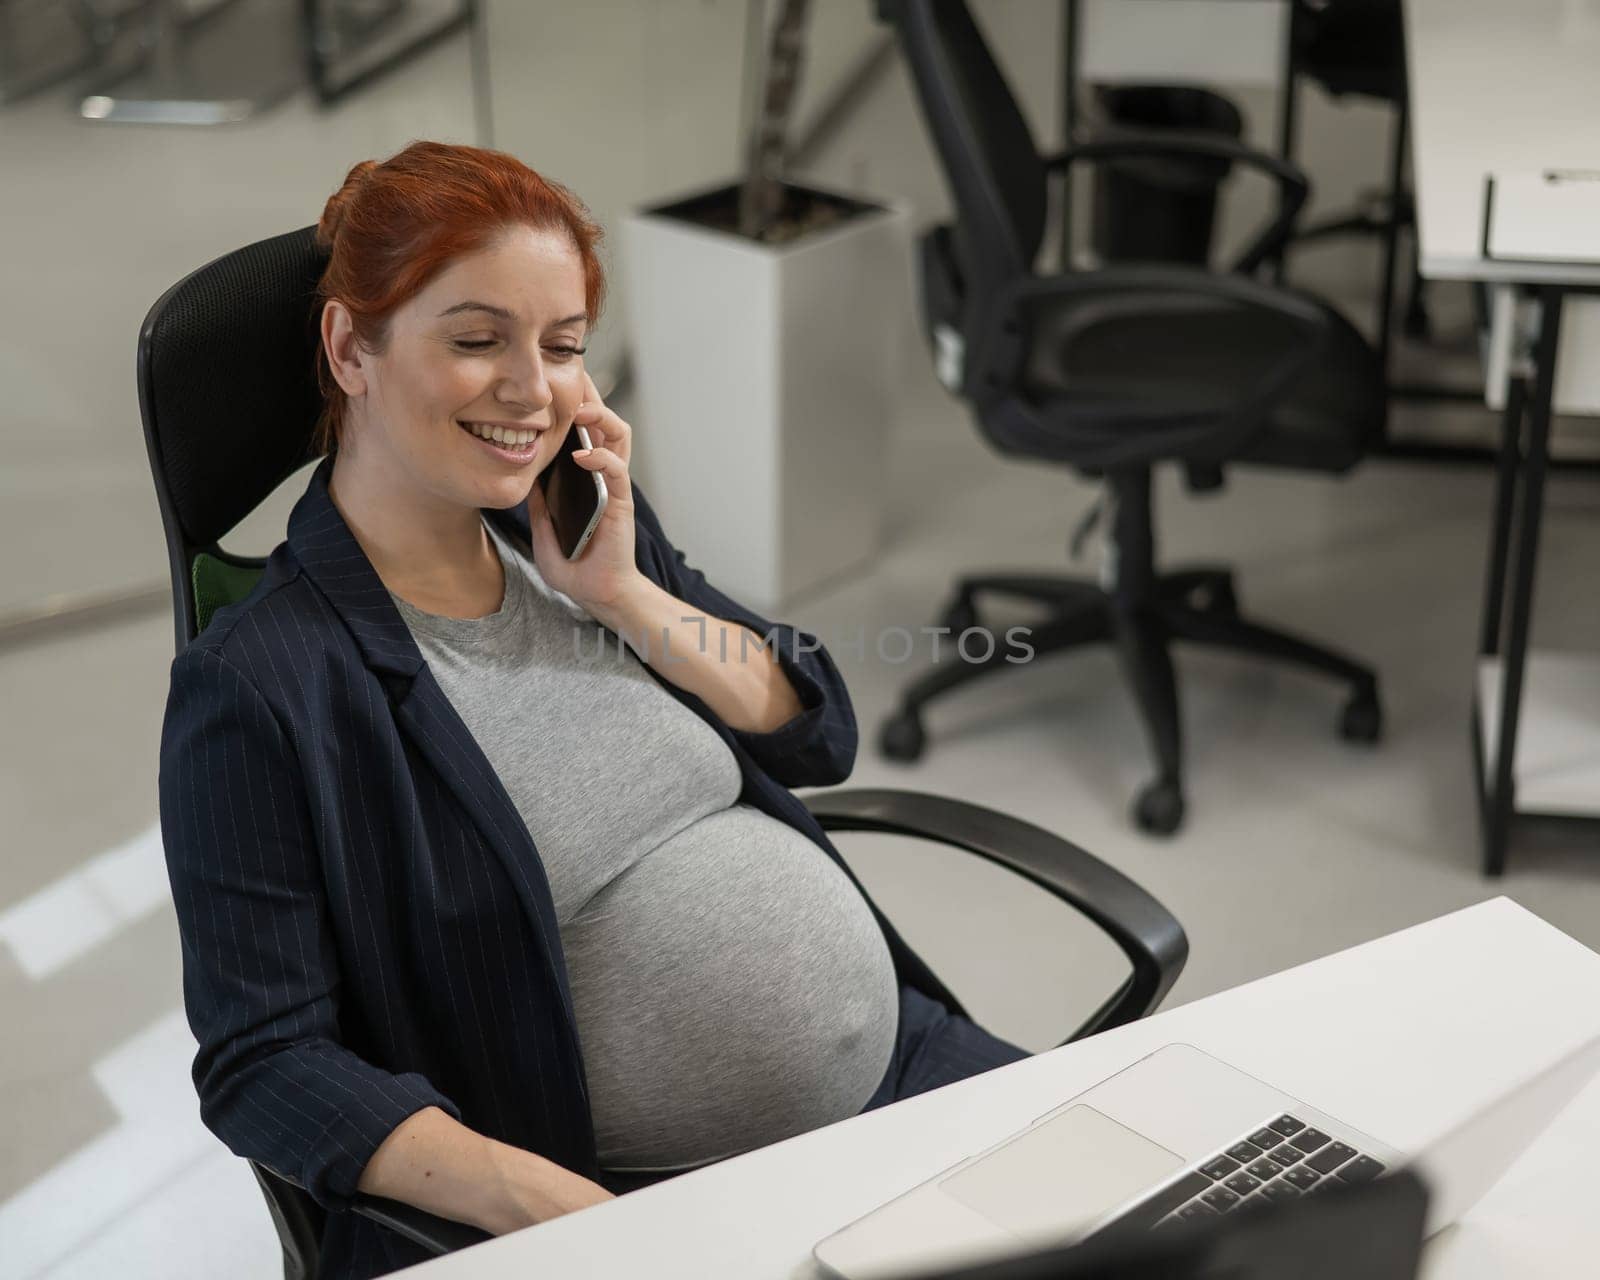 Pregnant woman using mobile phone in office. by mrwed54